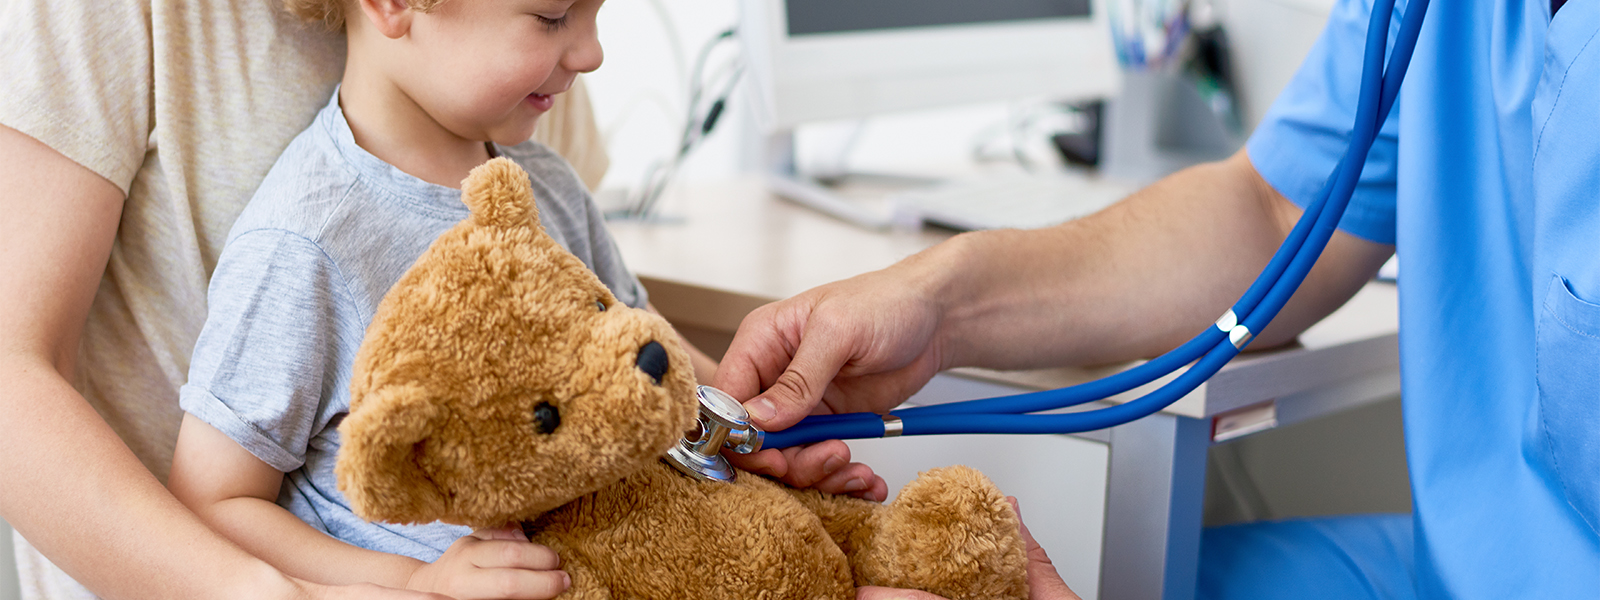 A child brings a teddy bear to the doctor office